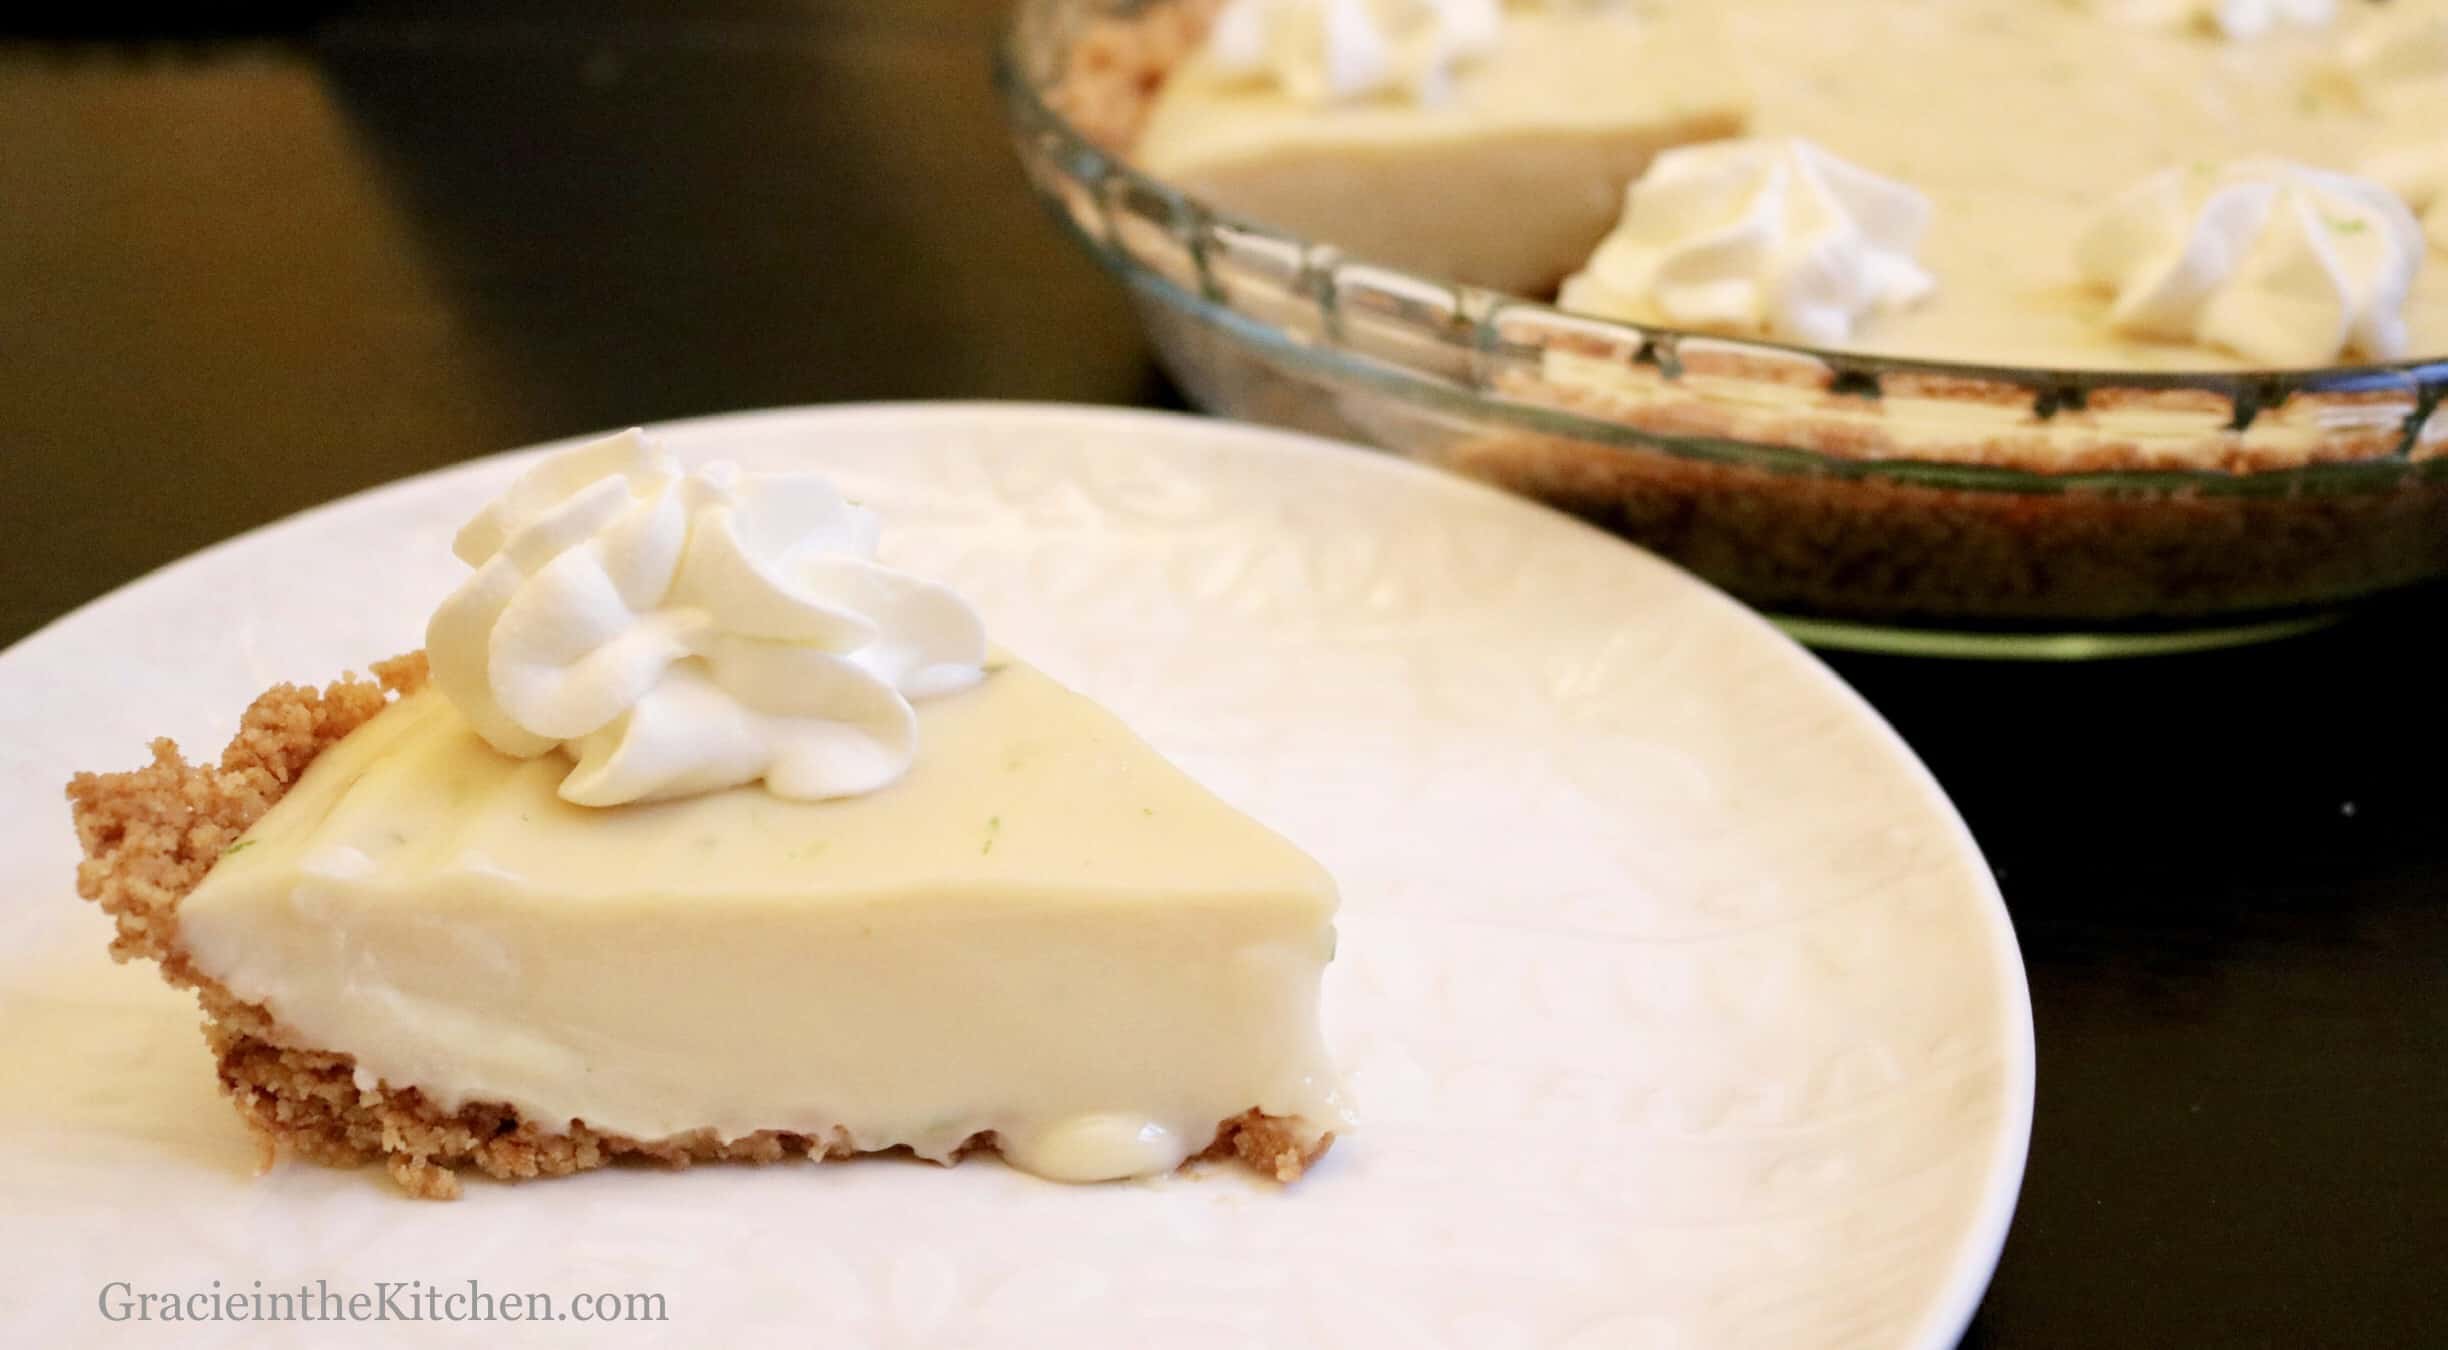 Best Key Lime Pie - Try a slice of this delicious key lime pie - yum!